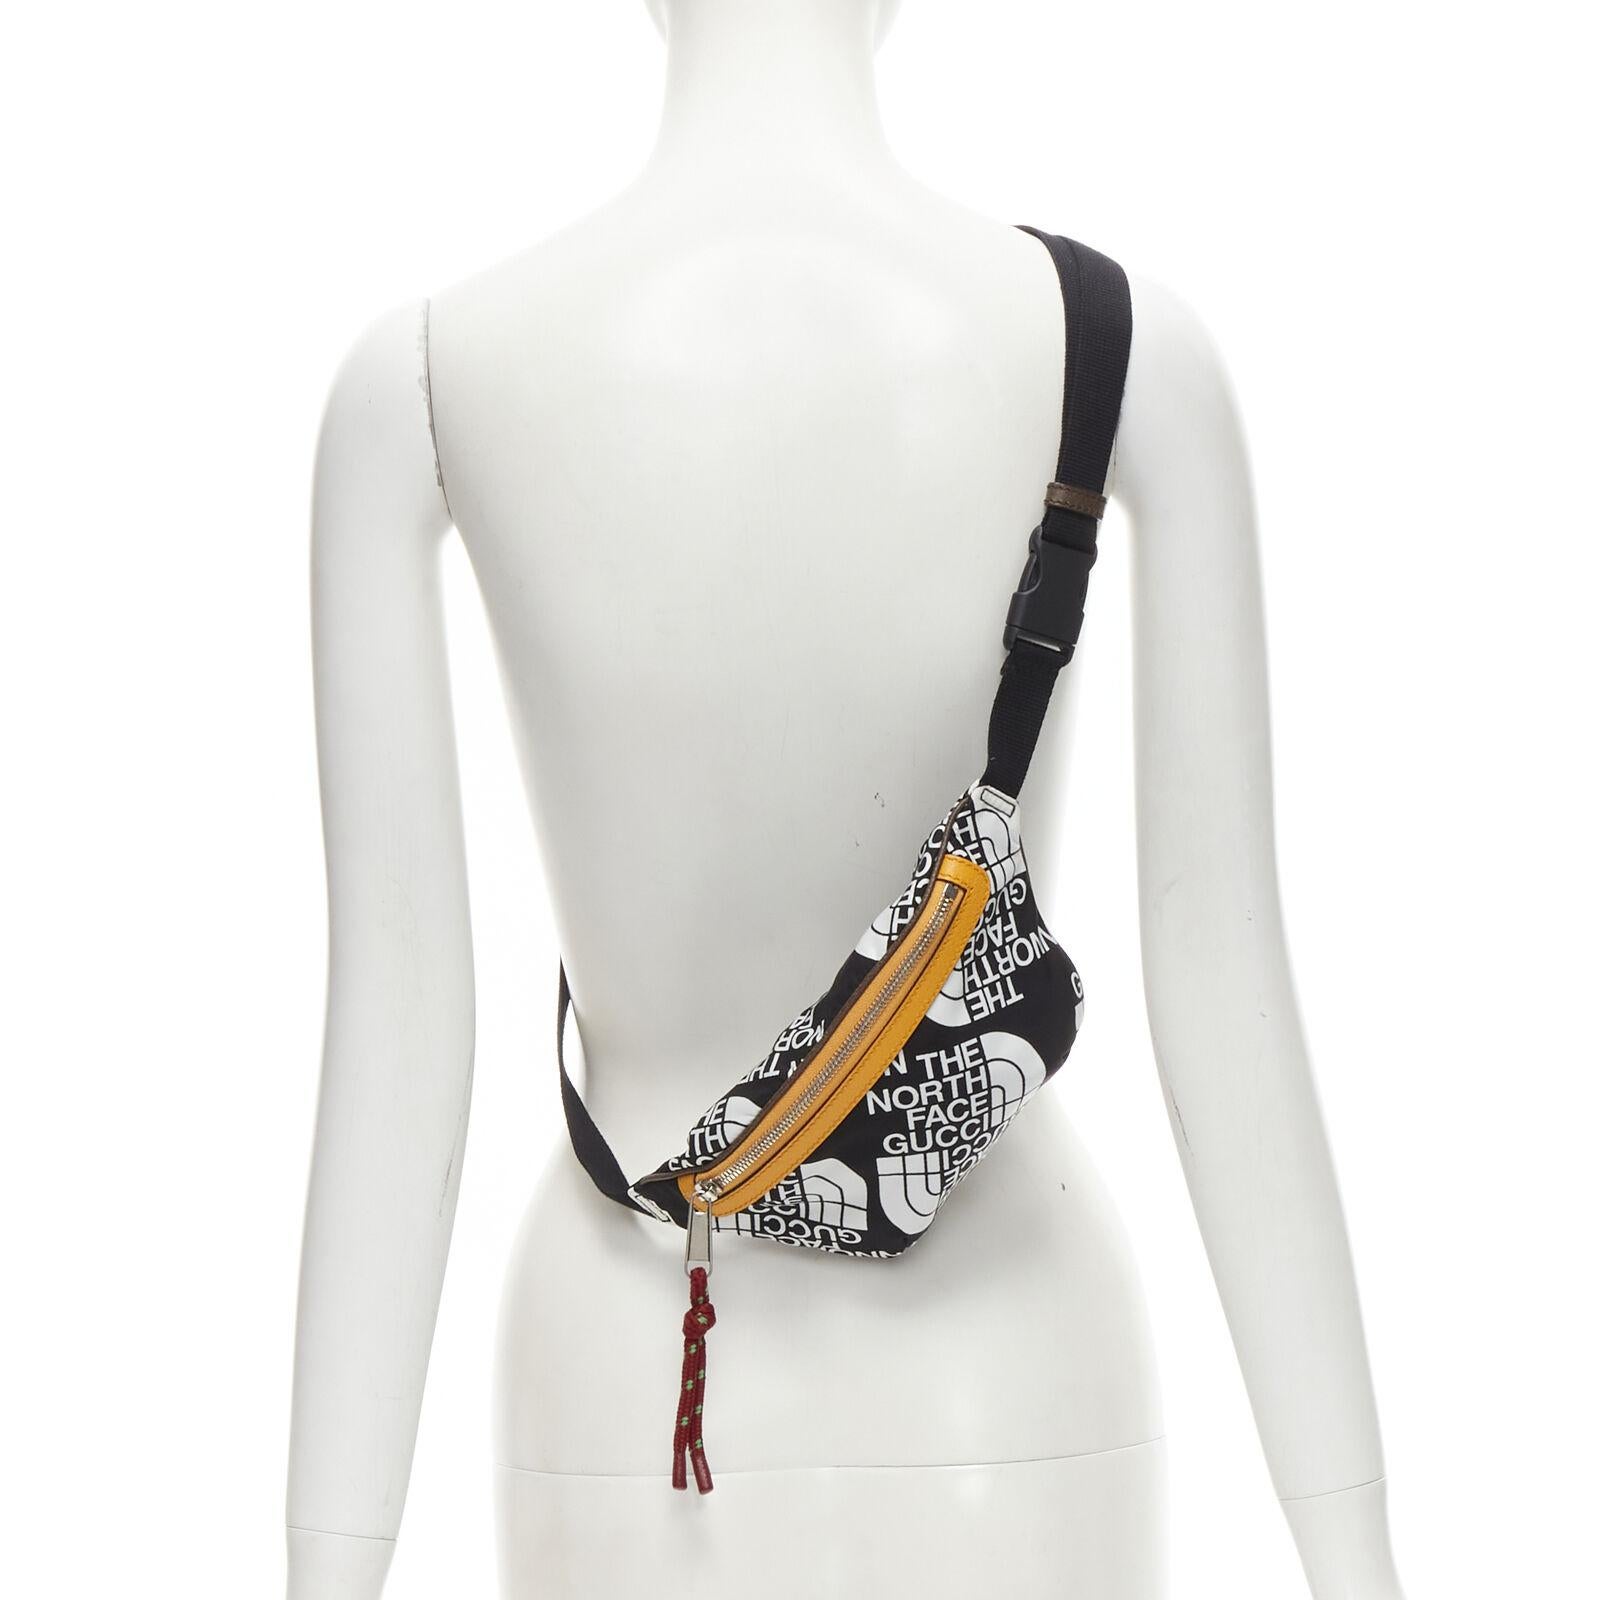 GUCCI The North Face black white monogram yellow zip belted waist bag
Reference: VACN/A00035
Brand: Gucci
Designer: Alessandro Michele
Collection: Gucci X The North Face
Material: Fabric, Leather
Color: Multicolour
Pattern: Monogram
Closure: